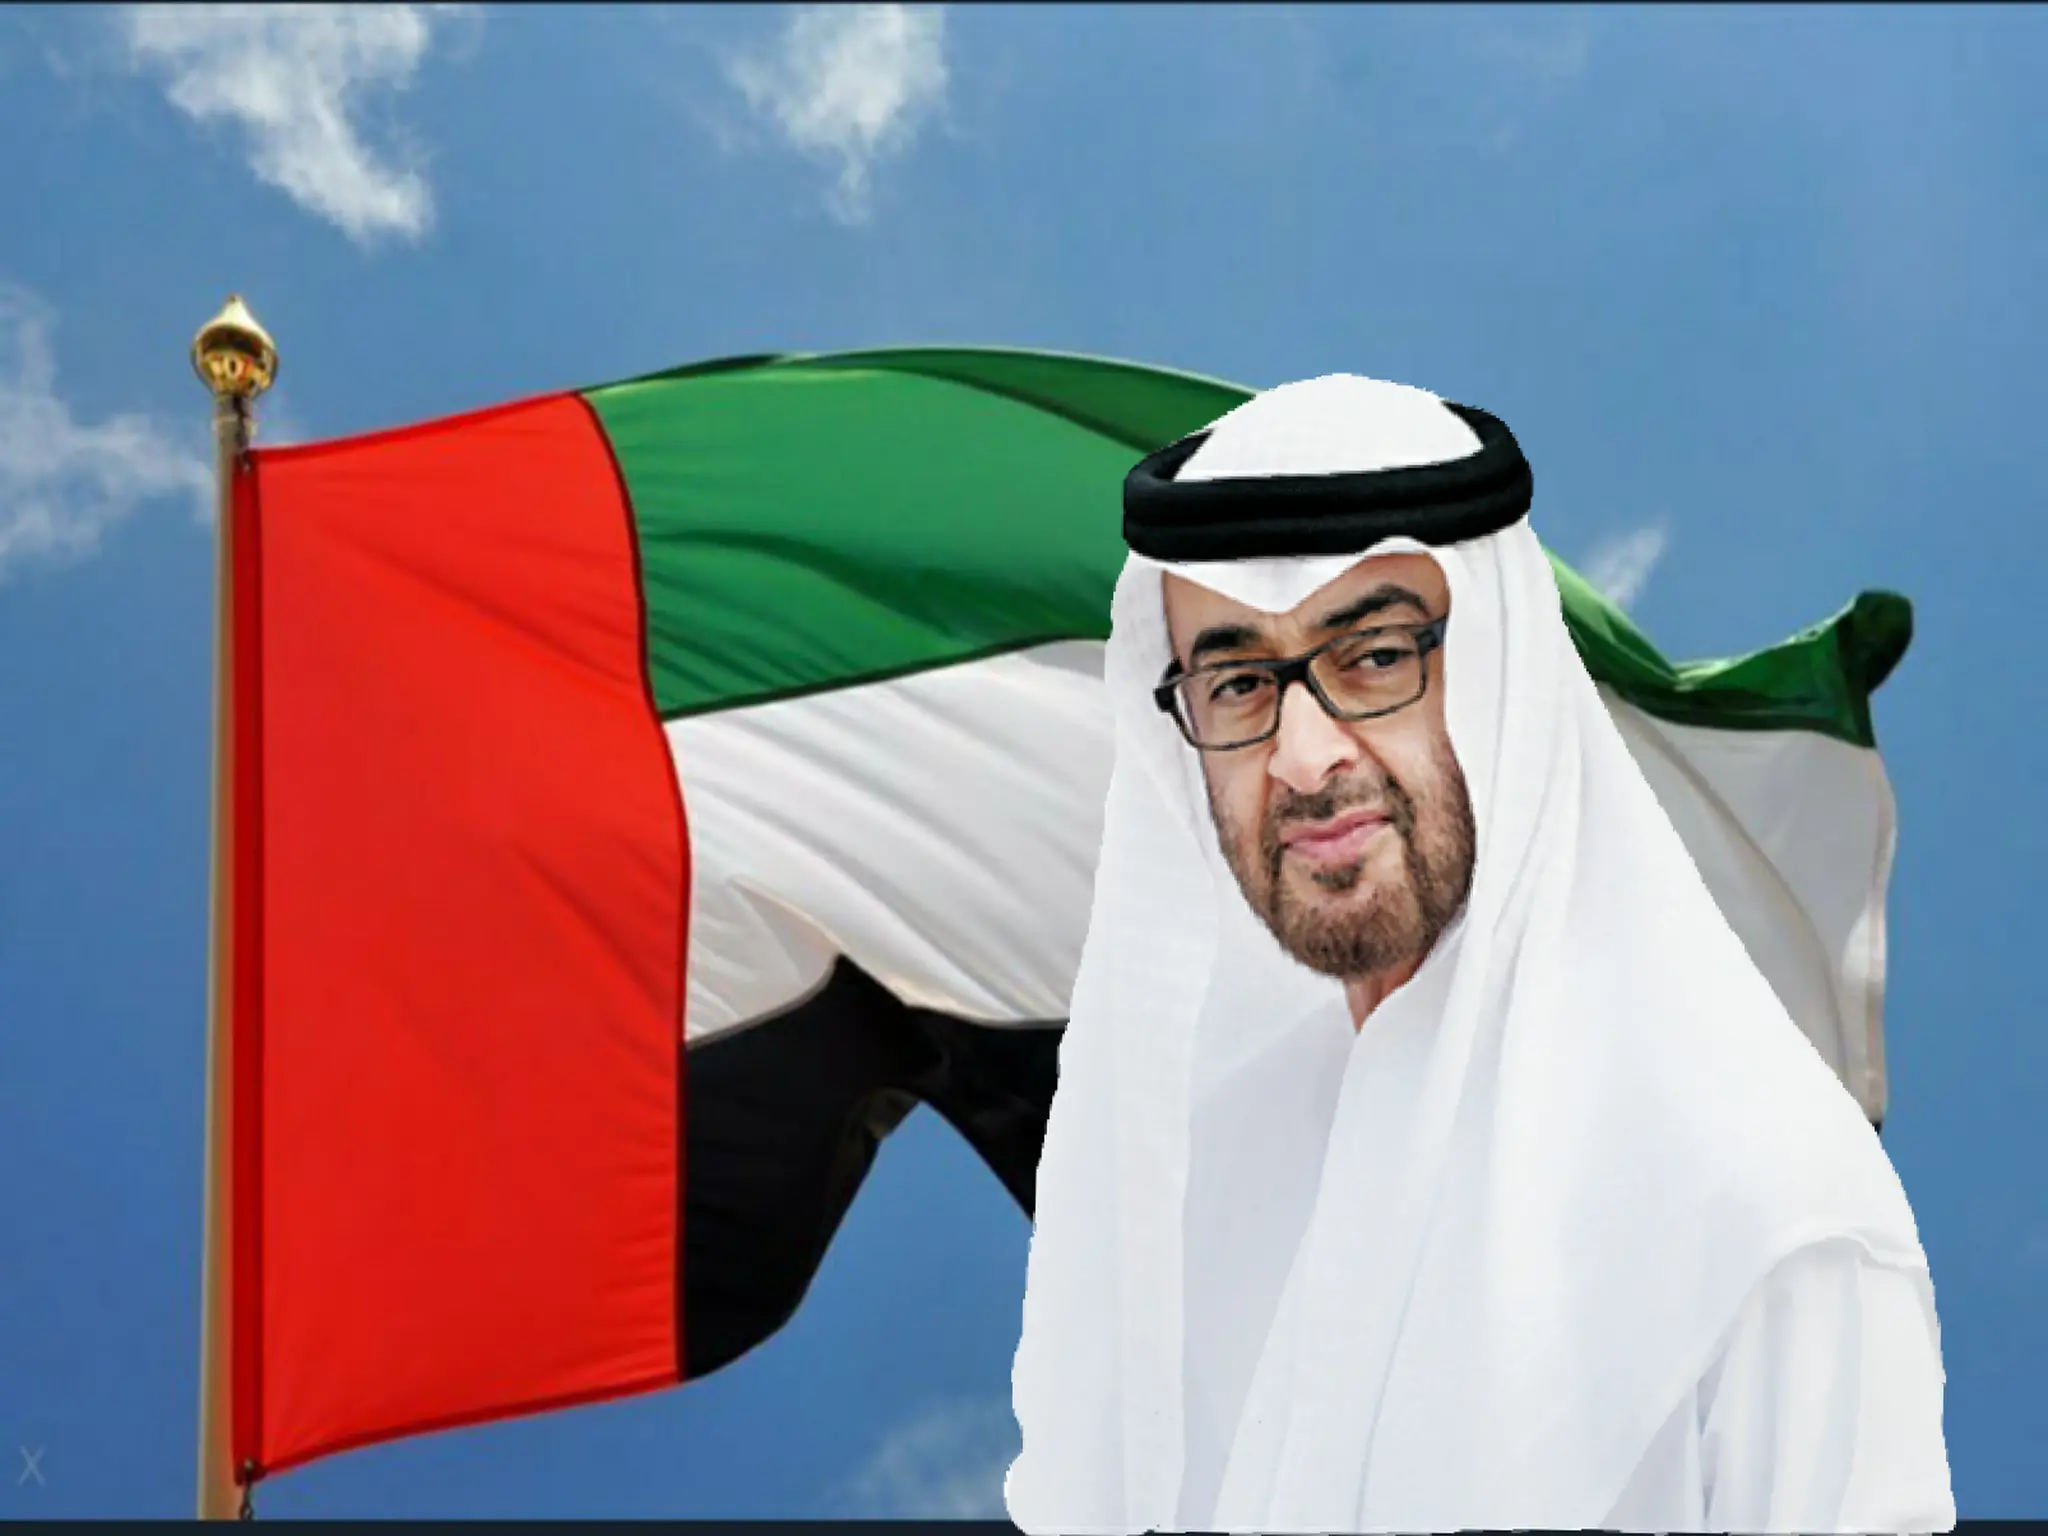 Good news from the rulers of the Emirates to hundreds of families on the occasion of Union Day